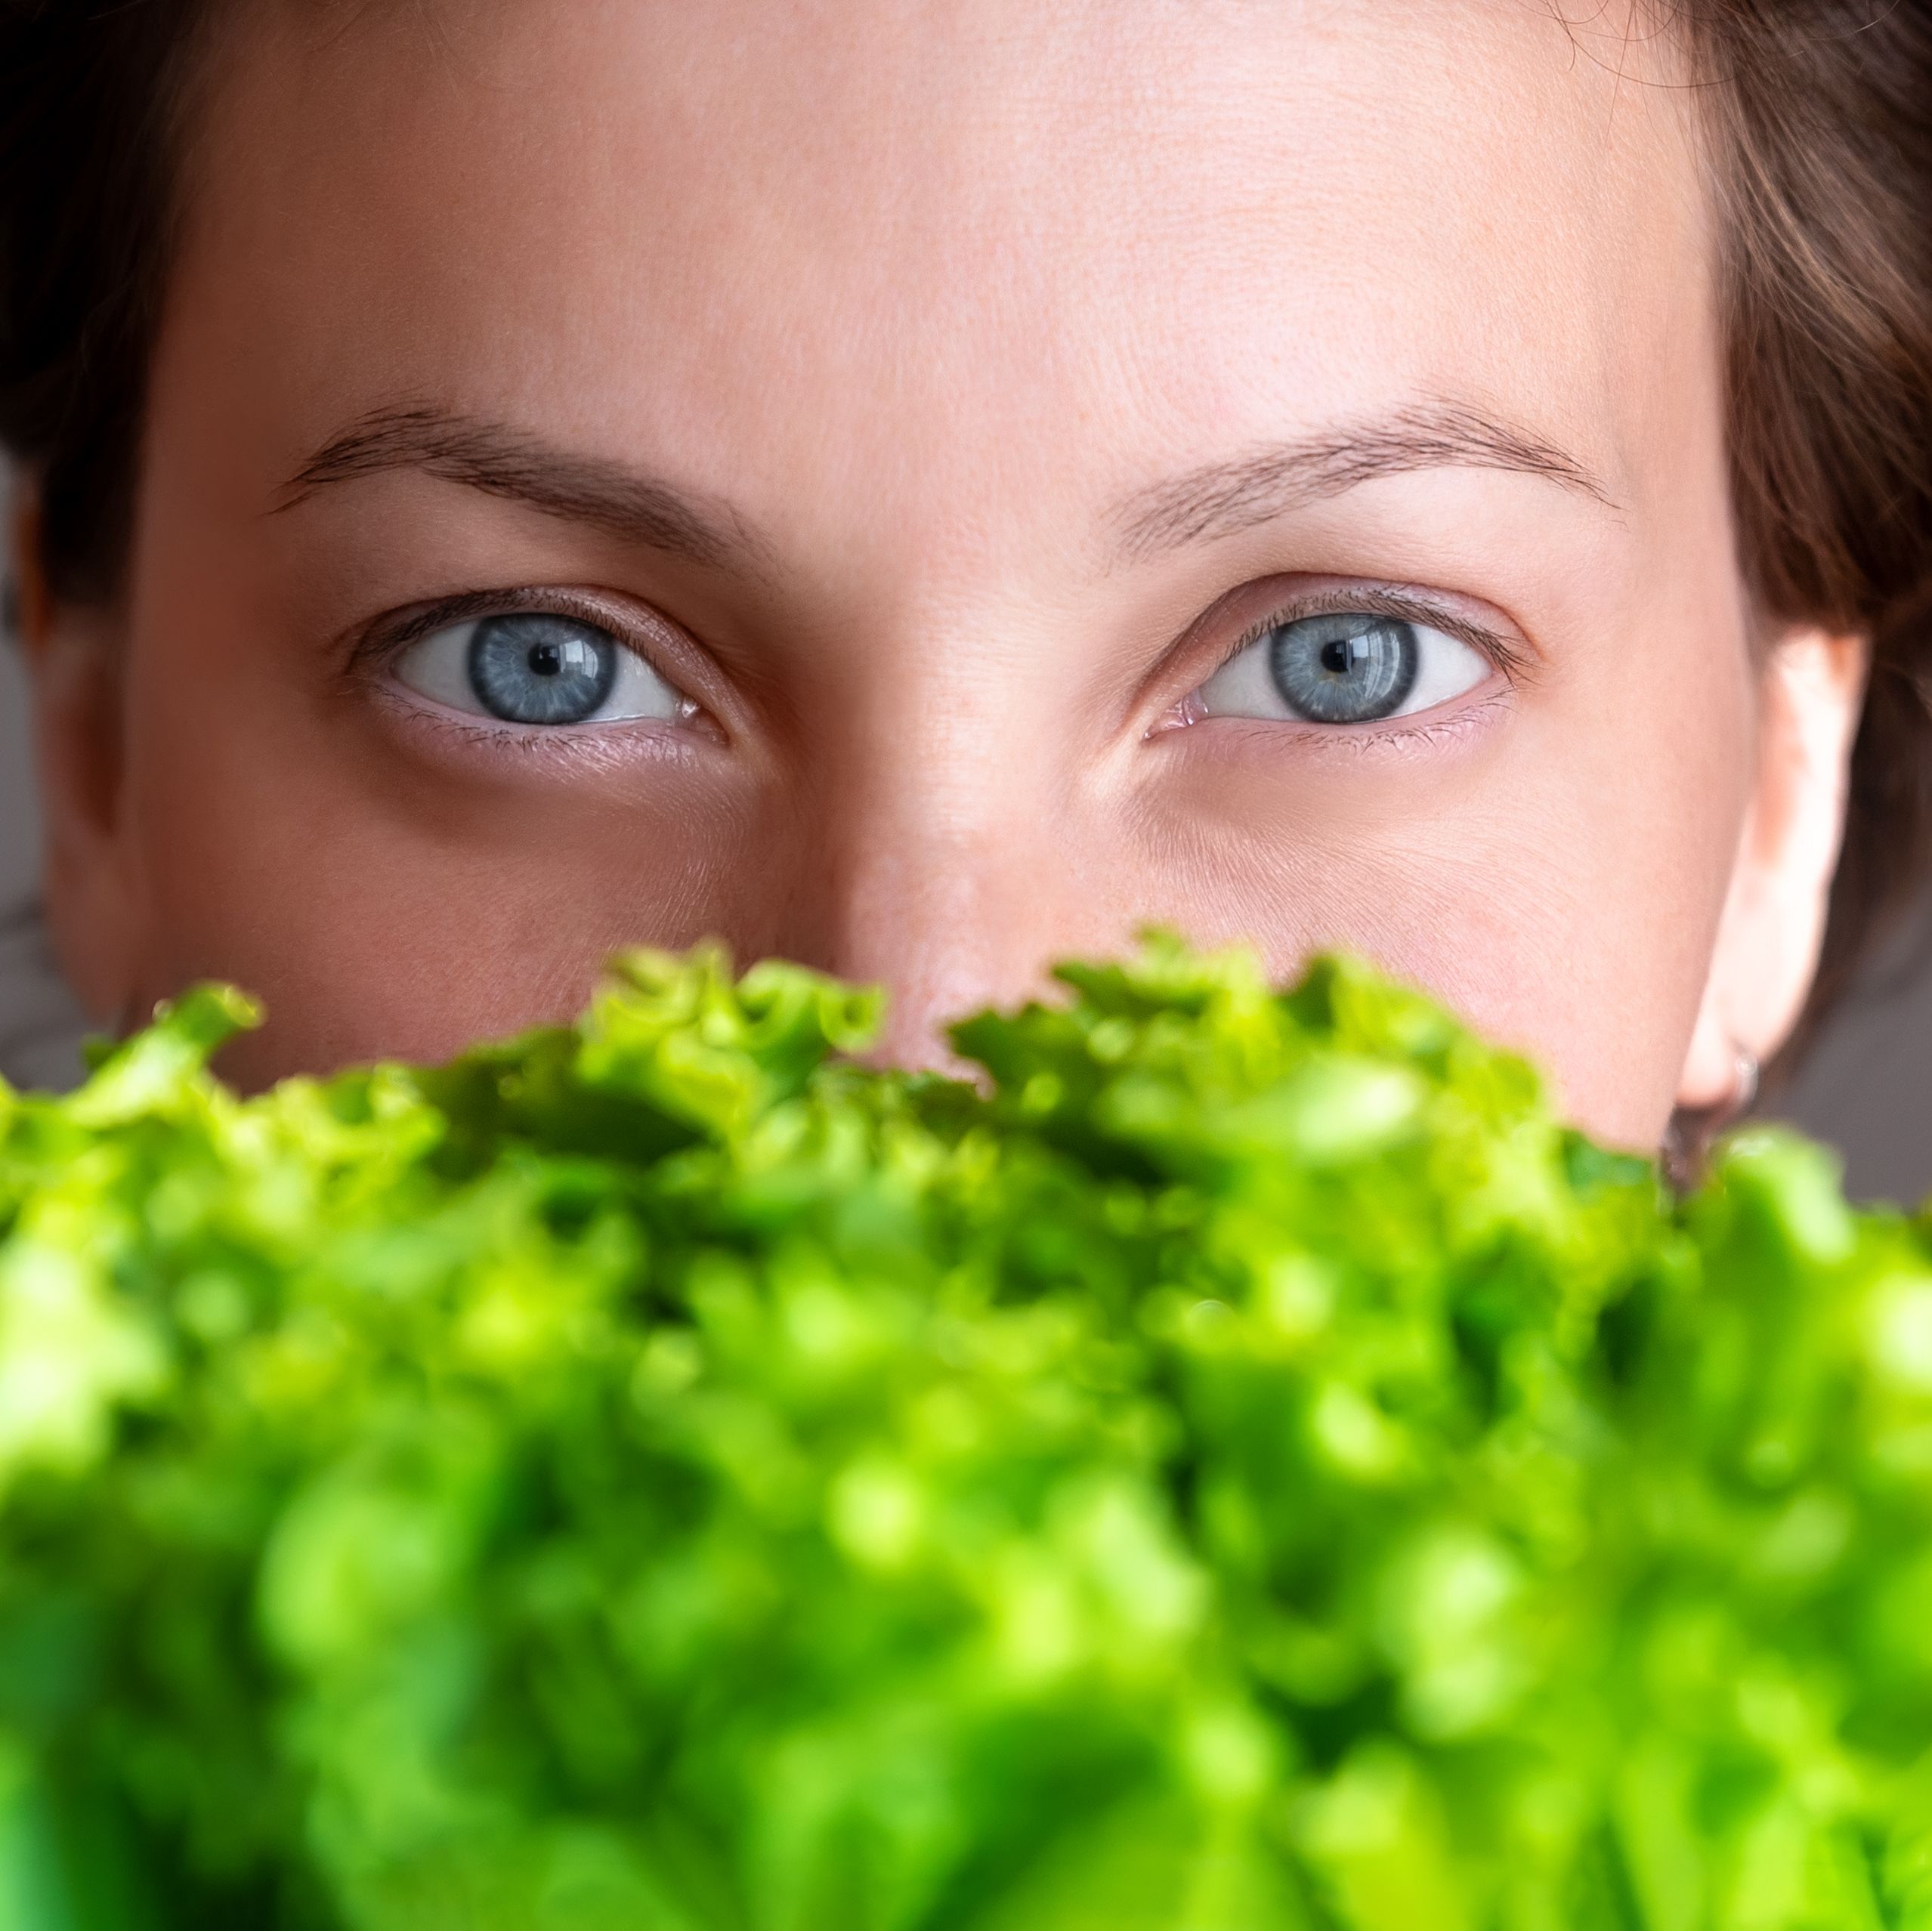 Eye Nutrition: Foods for Healthy Eyes